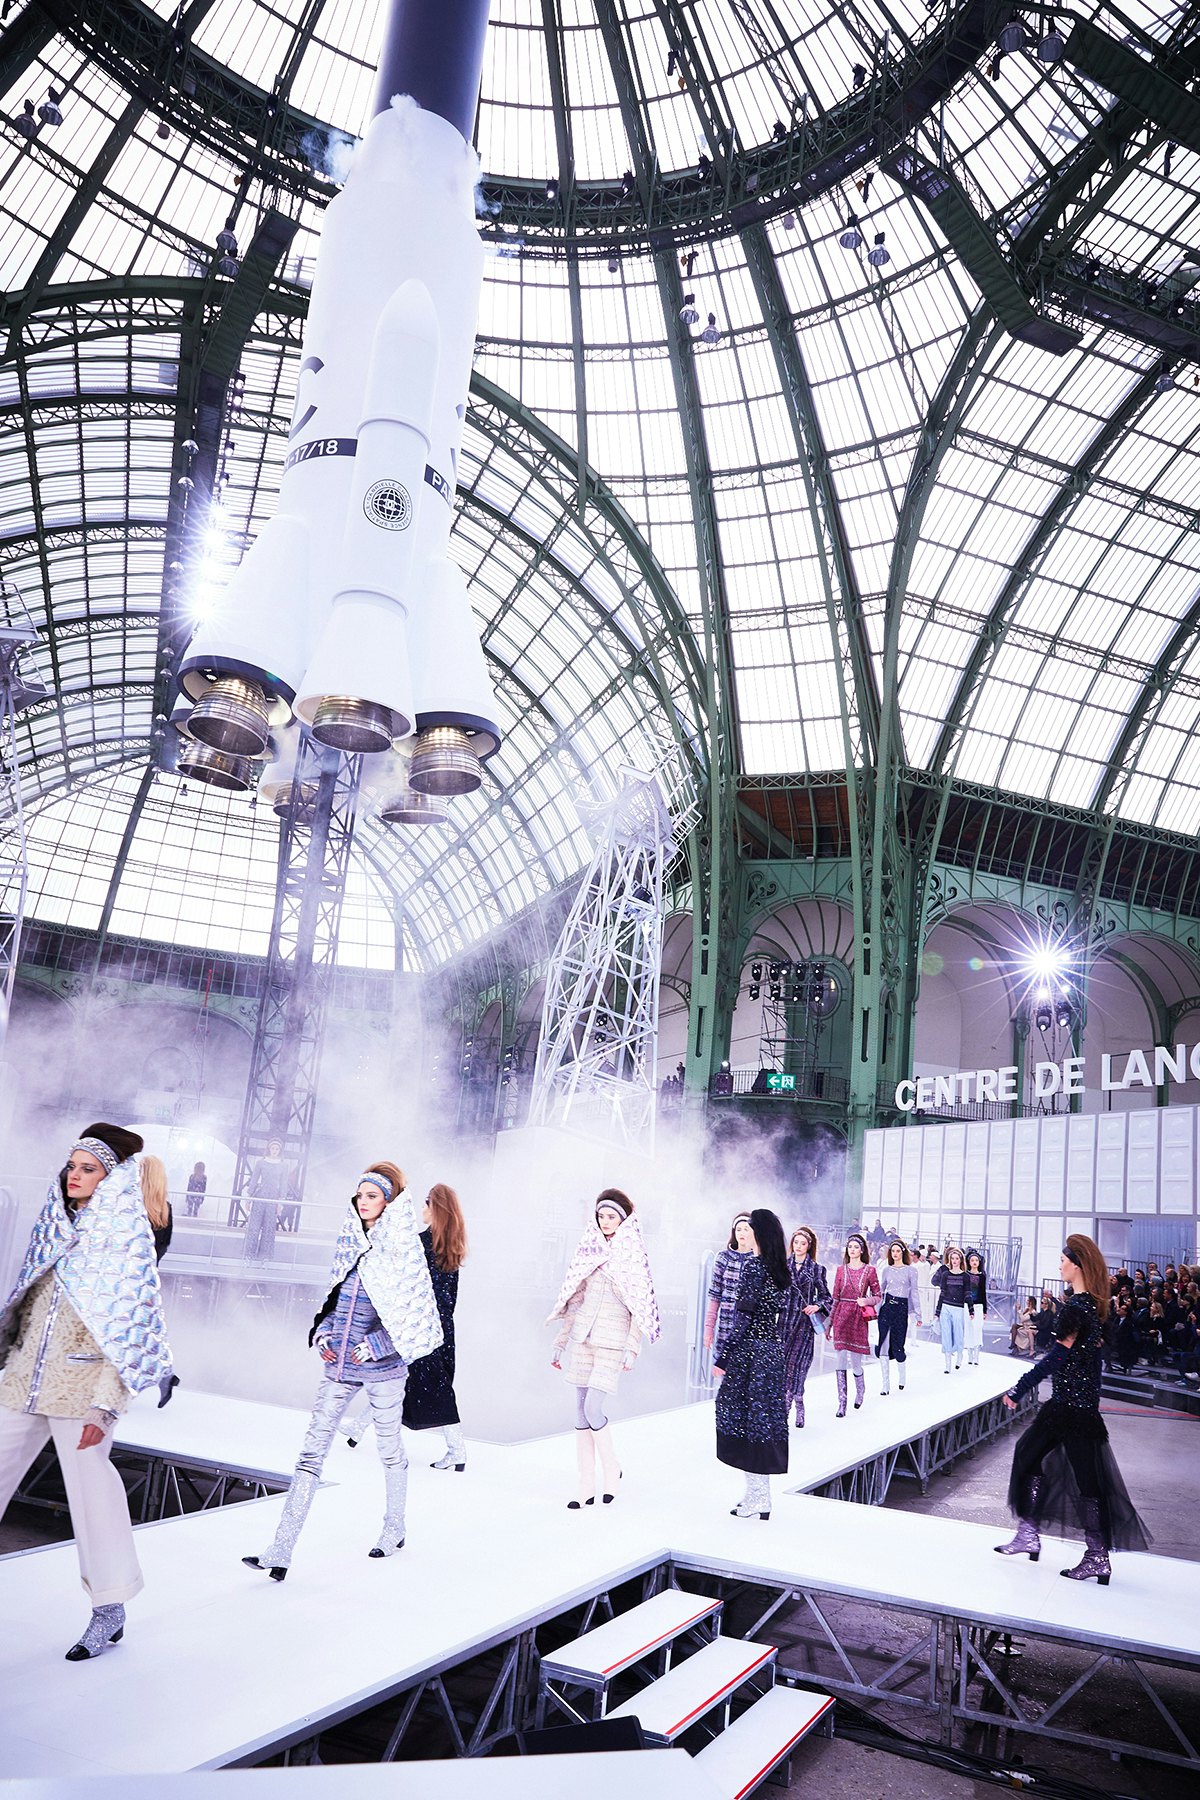 Chanel sparks outrage by felling 100yearold trees at Paris show